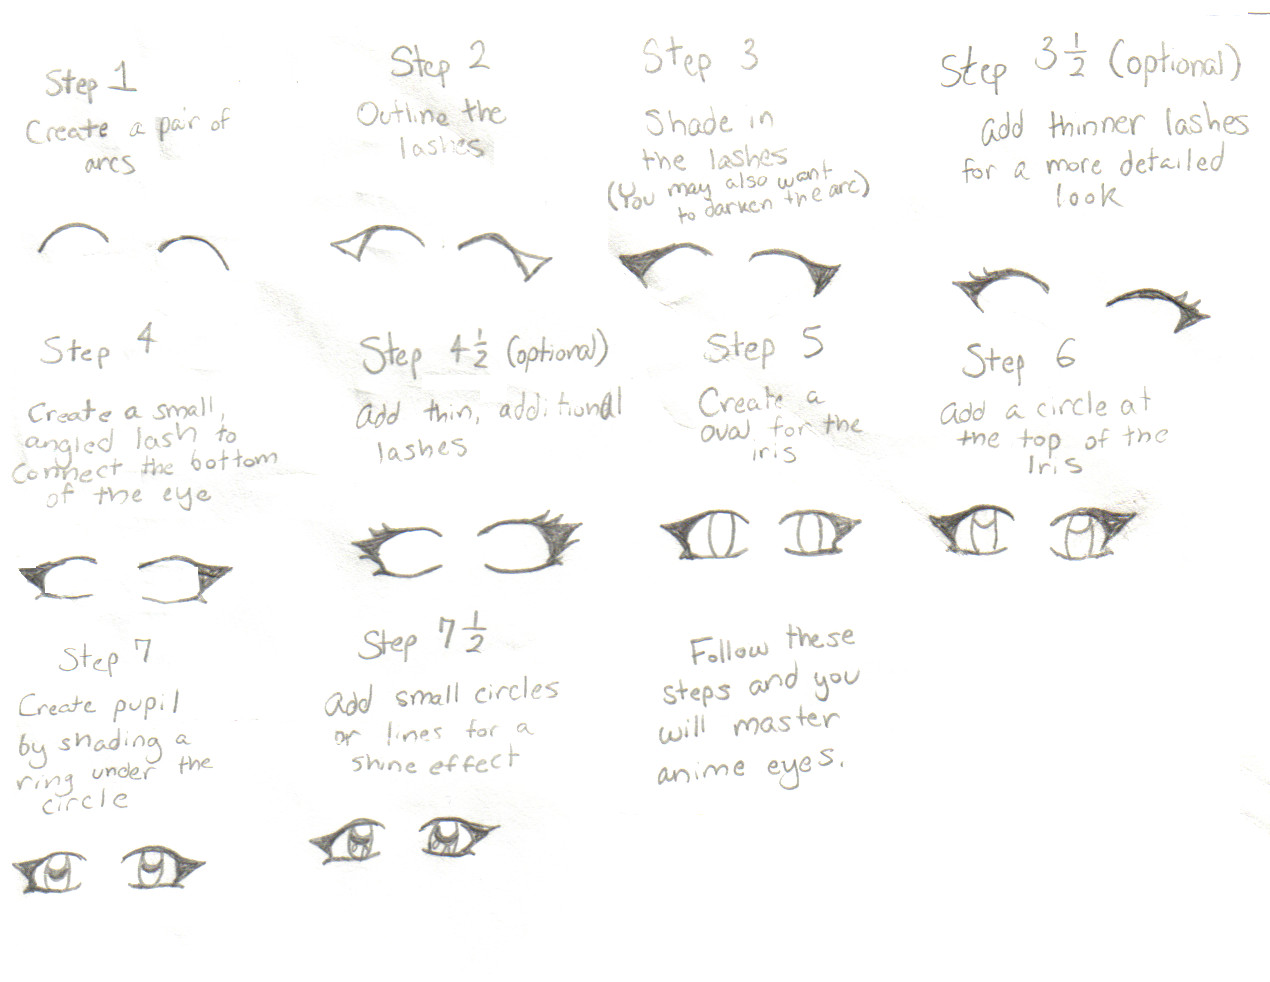 Detailed Step-by-Step: How to Draw Female Anime Eyes